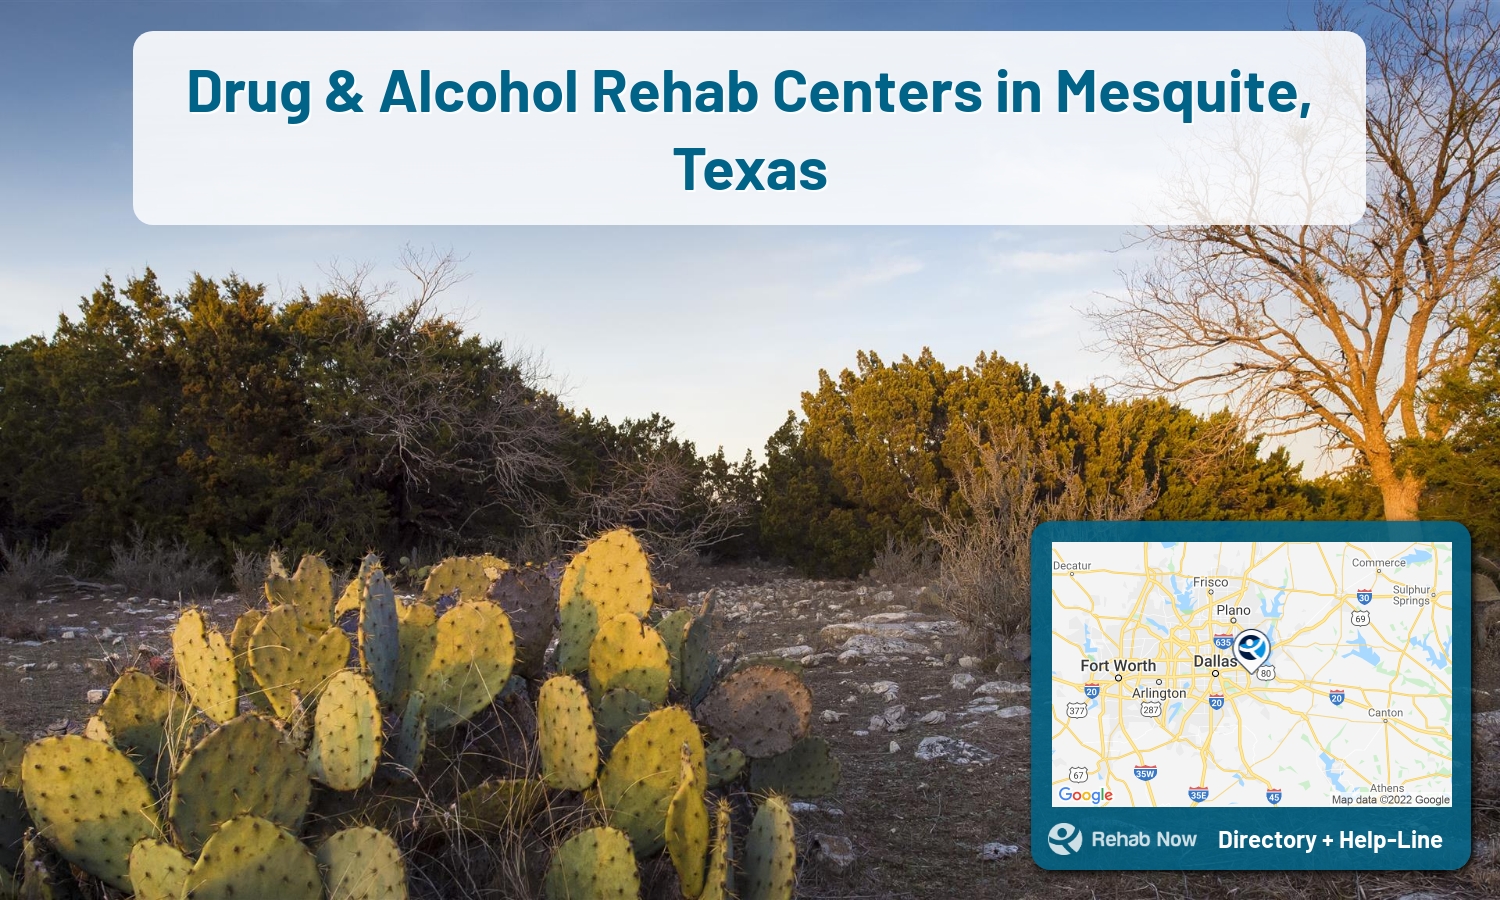 Need treatment nearby in Mesquite, Texas? Choose a drug/alcohol rehab center from our list, or call our hotline now for free help.